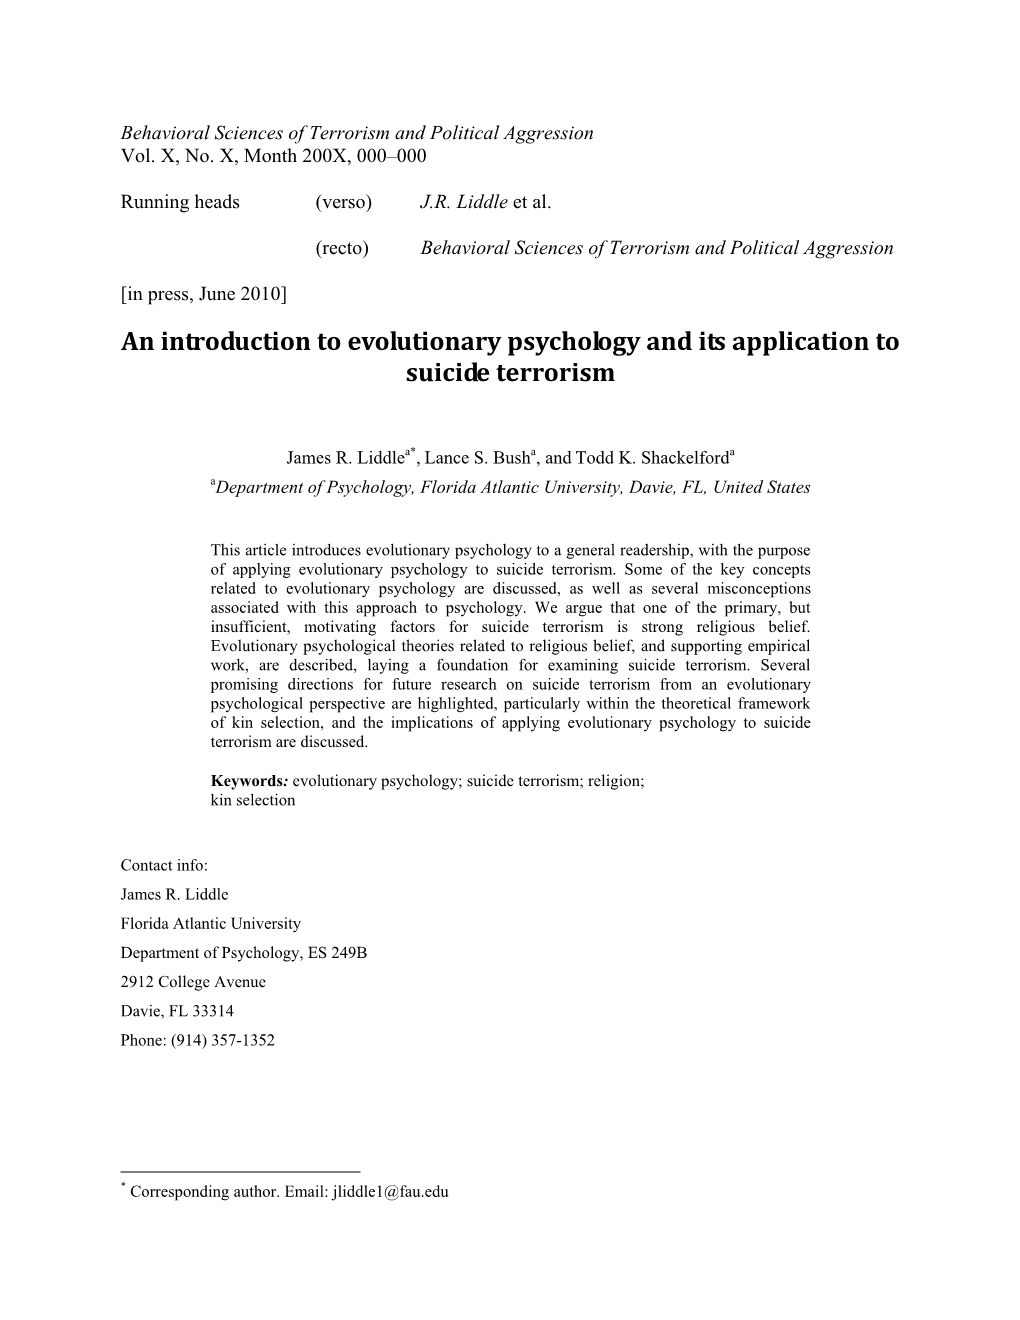 An Introduction to Evolutionary Psychology and Its Application to Suicide Terrorism